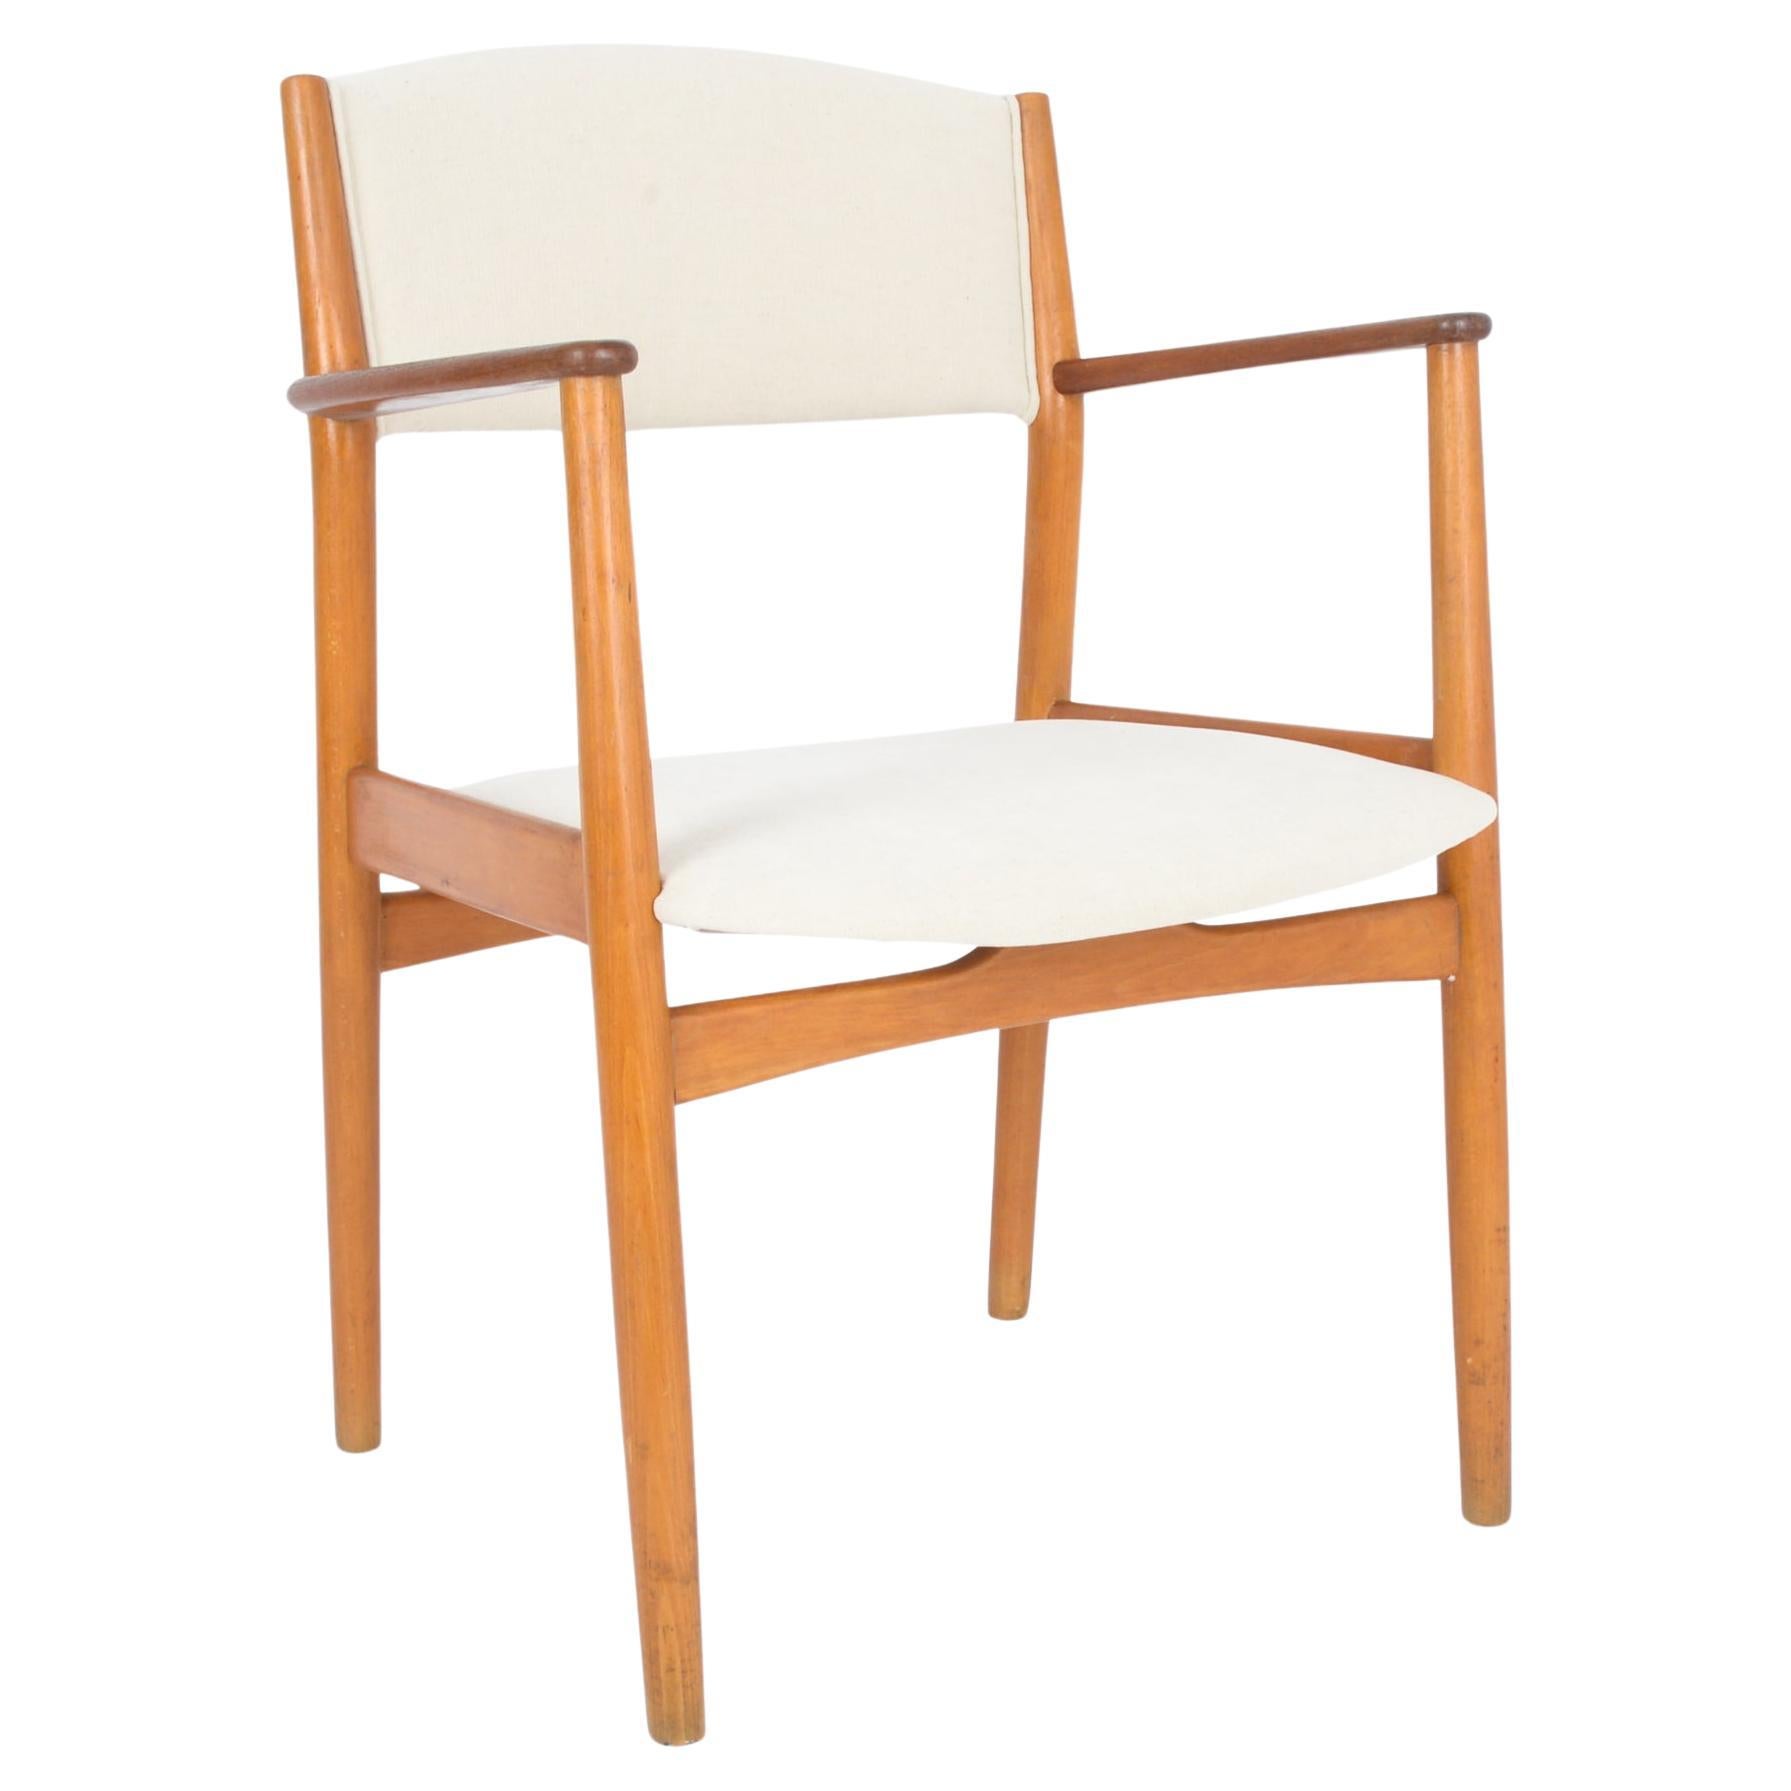 1960s Danish Wooden Armchair with Upholstered Seat and Back